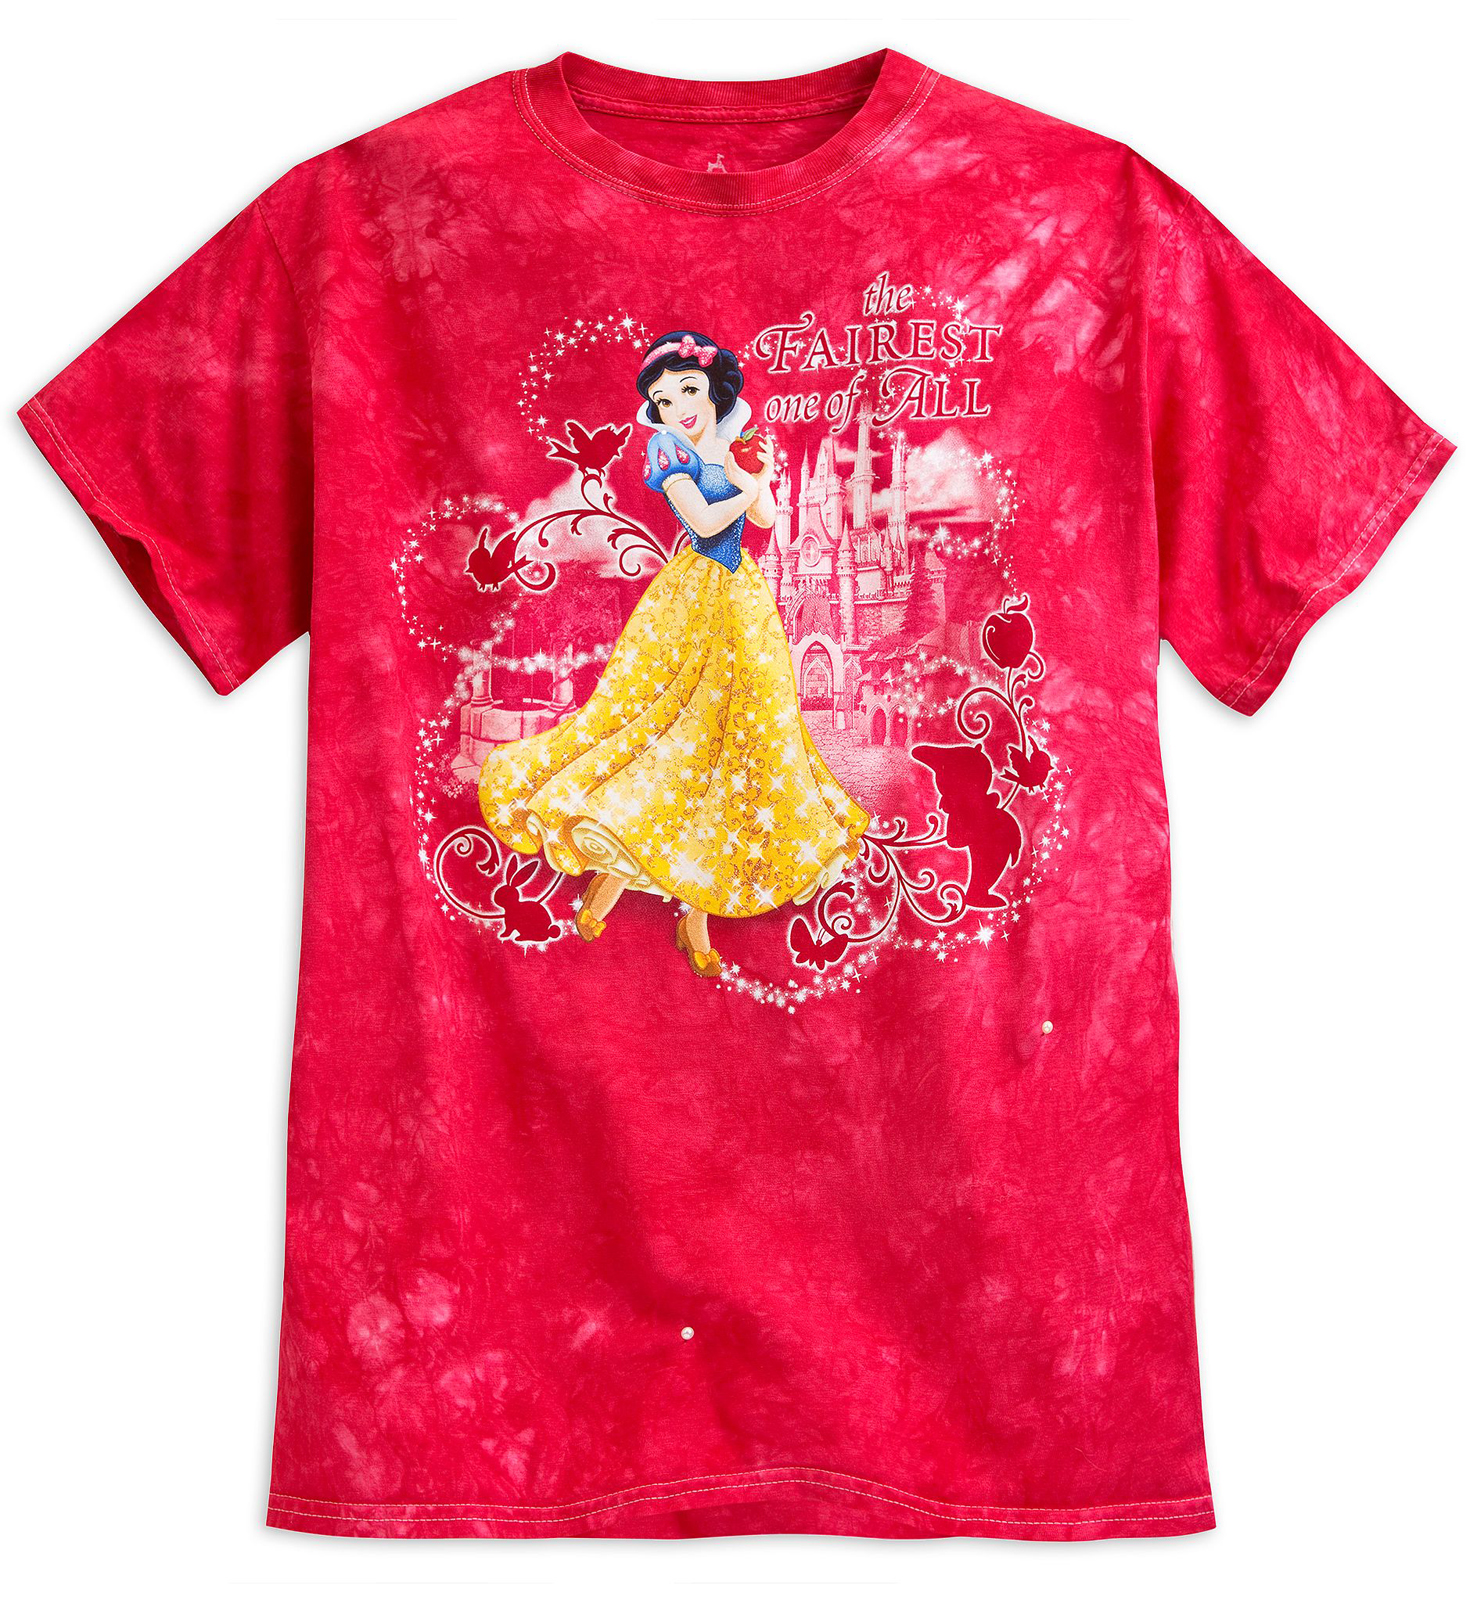 Filmic Light - Snow White Archive: 2016 Snow White Tees, Tanks and 